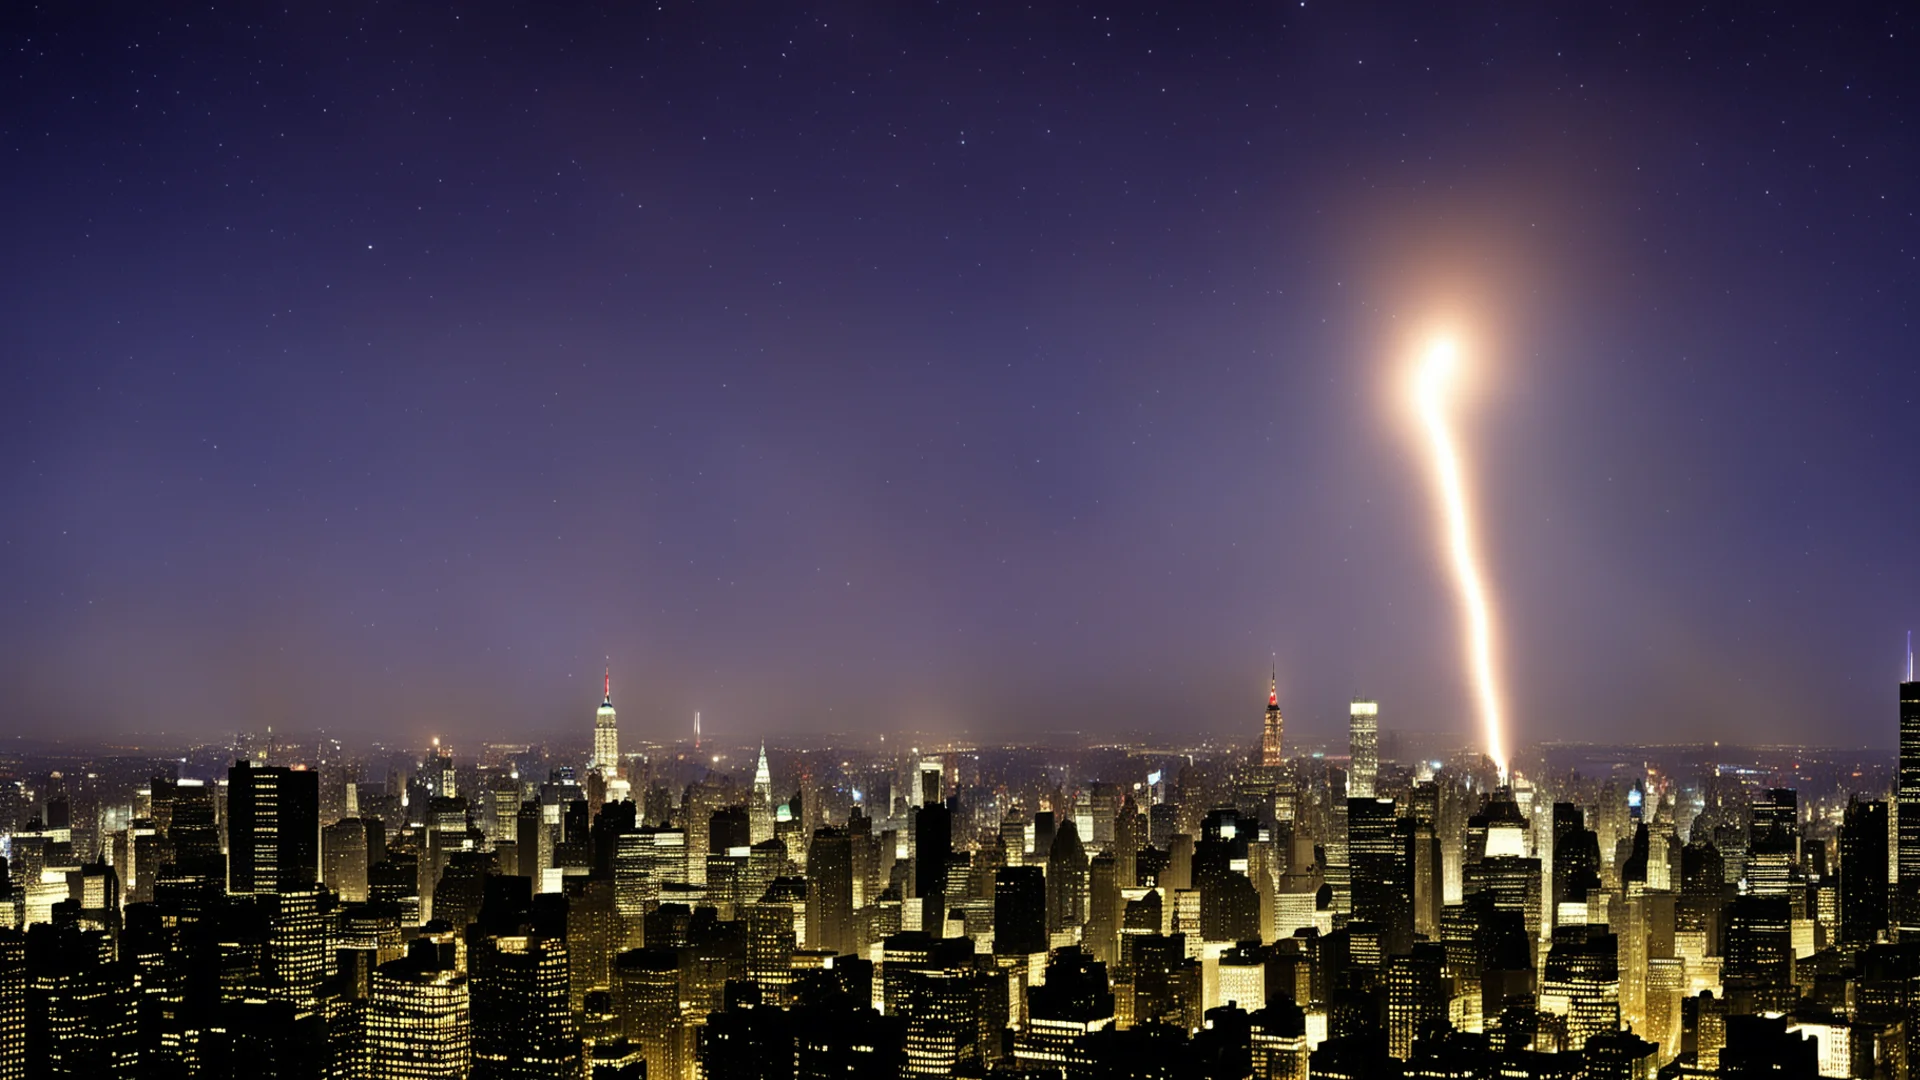 comet crashing into new york at night confident engaging wow artstation art 3 wide